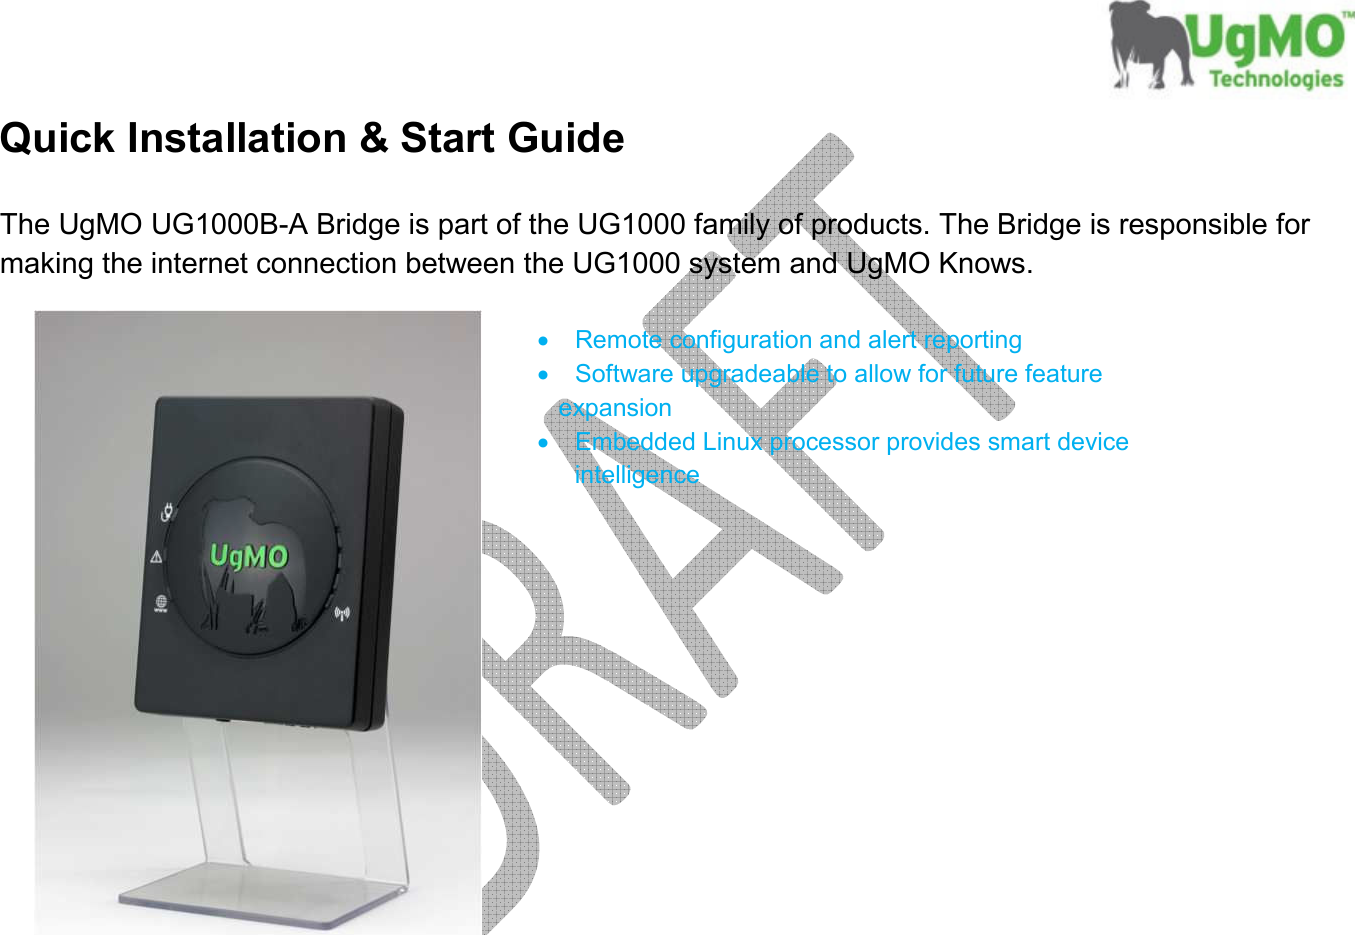       Quick Installation &amp; Start Guide  The UgMO UG1000B-A Bridge is part of the UG1000 family of products. The Bridge is responsible for making the internet connection between the UG1000 system and UgMO Knows.    •  Remote configuration and alert reporting •  Software upgradeable to allow for future feature           expansion •  Embedded Linux processor provides smart device intelligence             